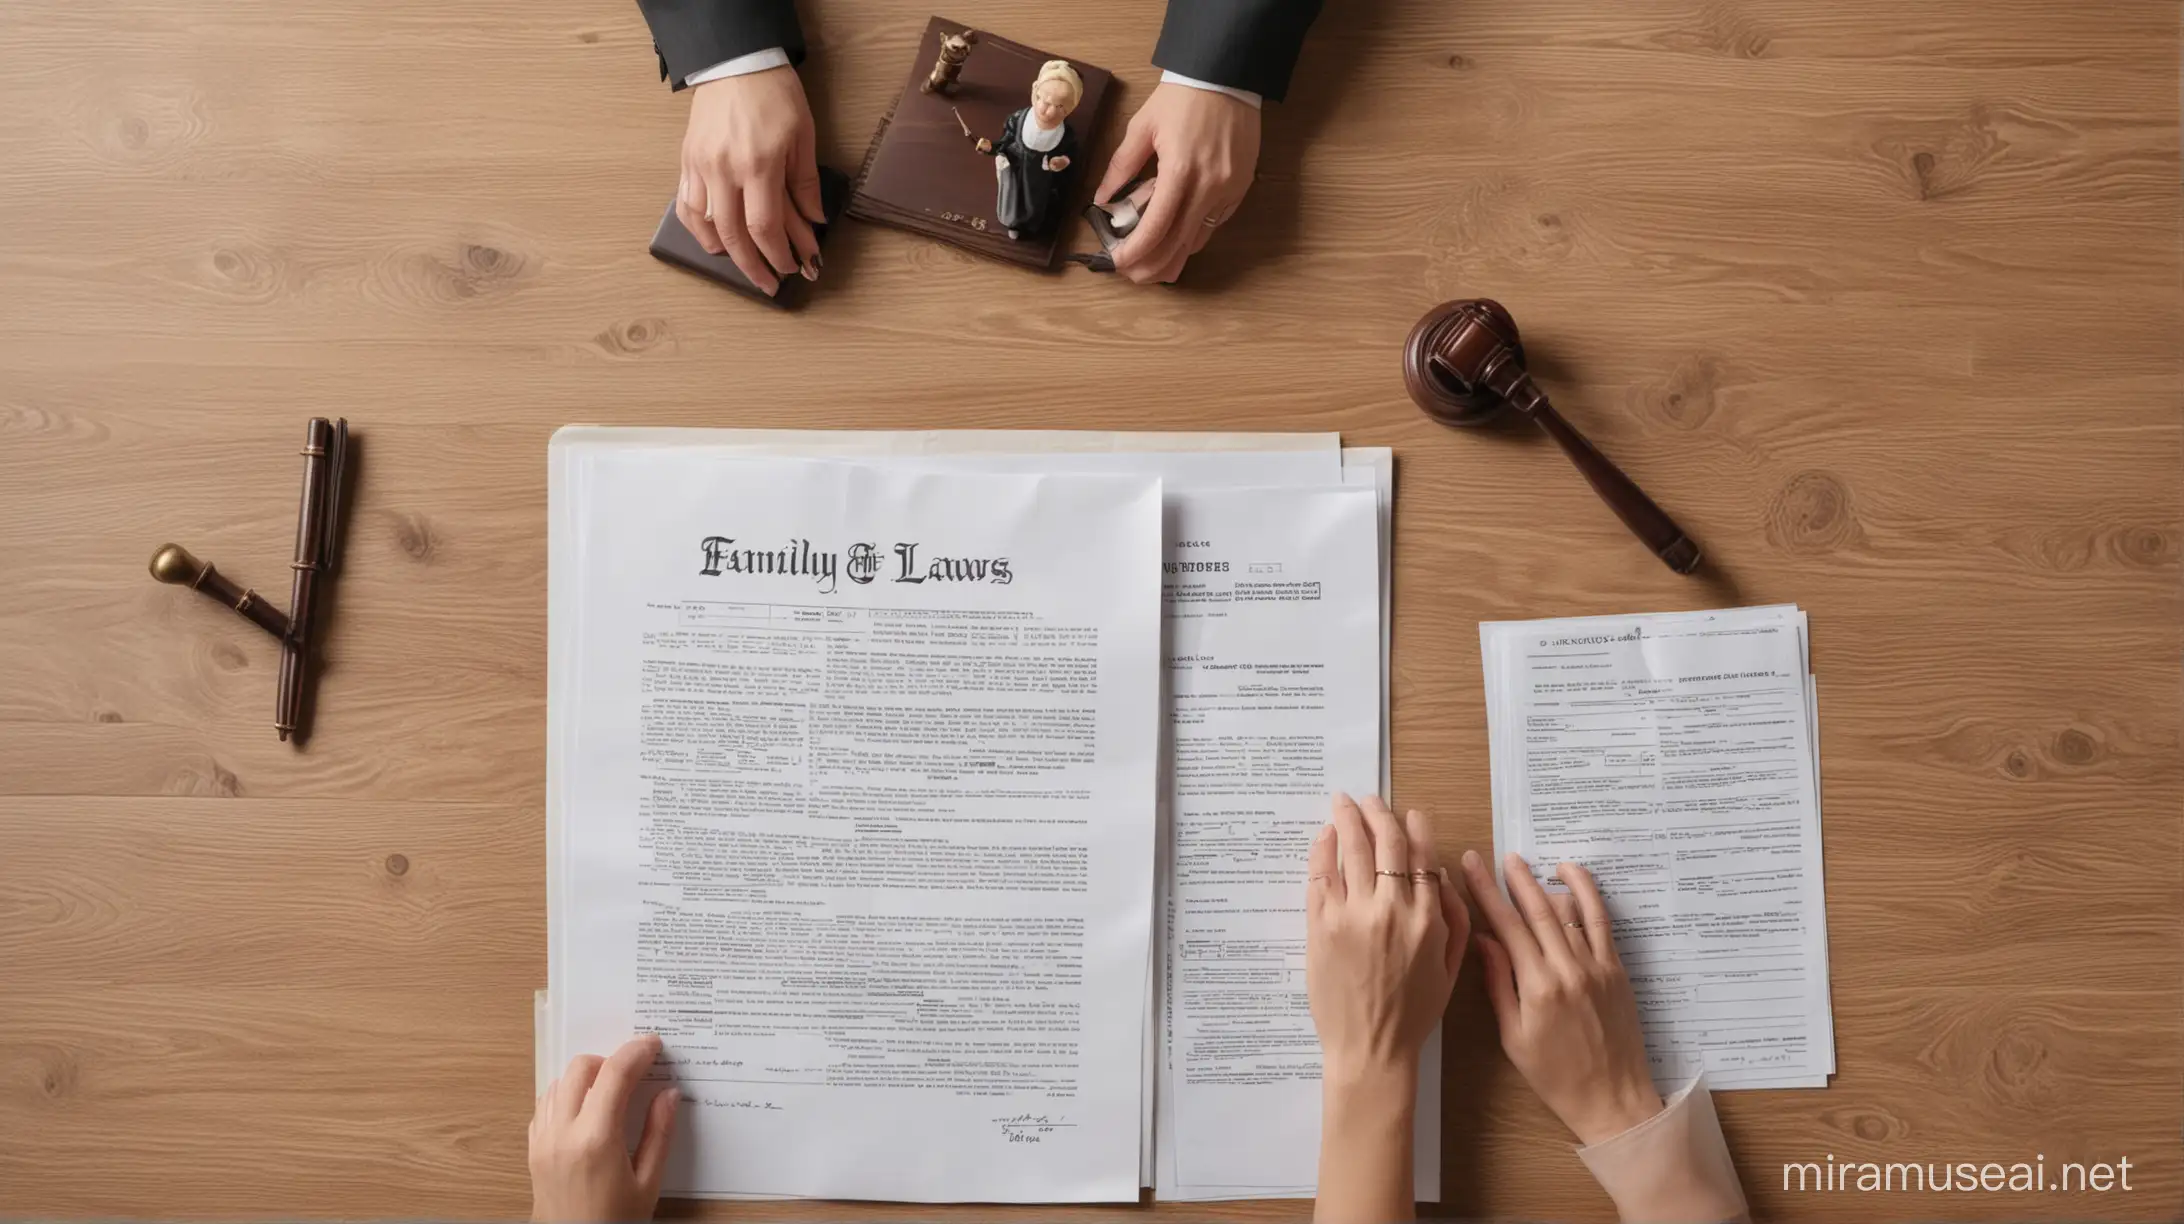 Family Laws and divorce; woman with wedding ring and judge gavels reading documents, top view